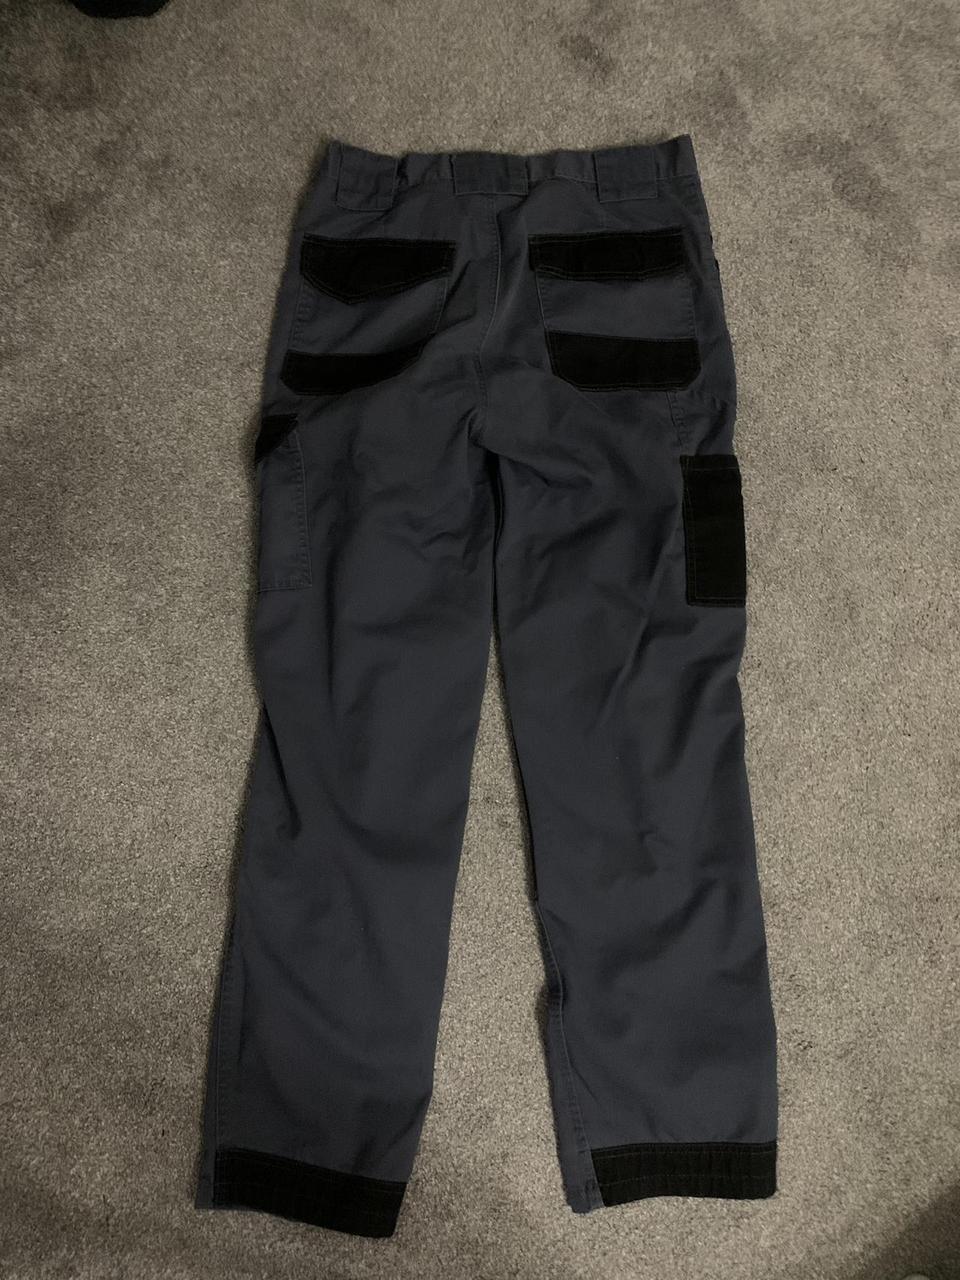 Men’s site work trousers perfect condition, selling... - Depop